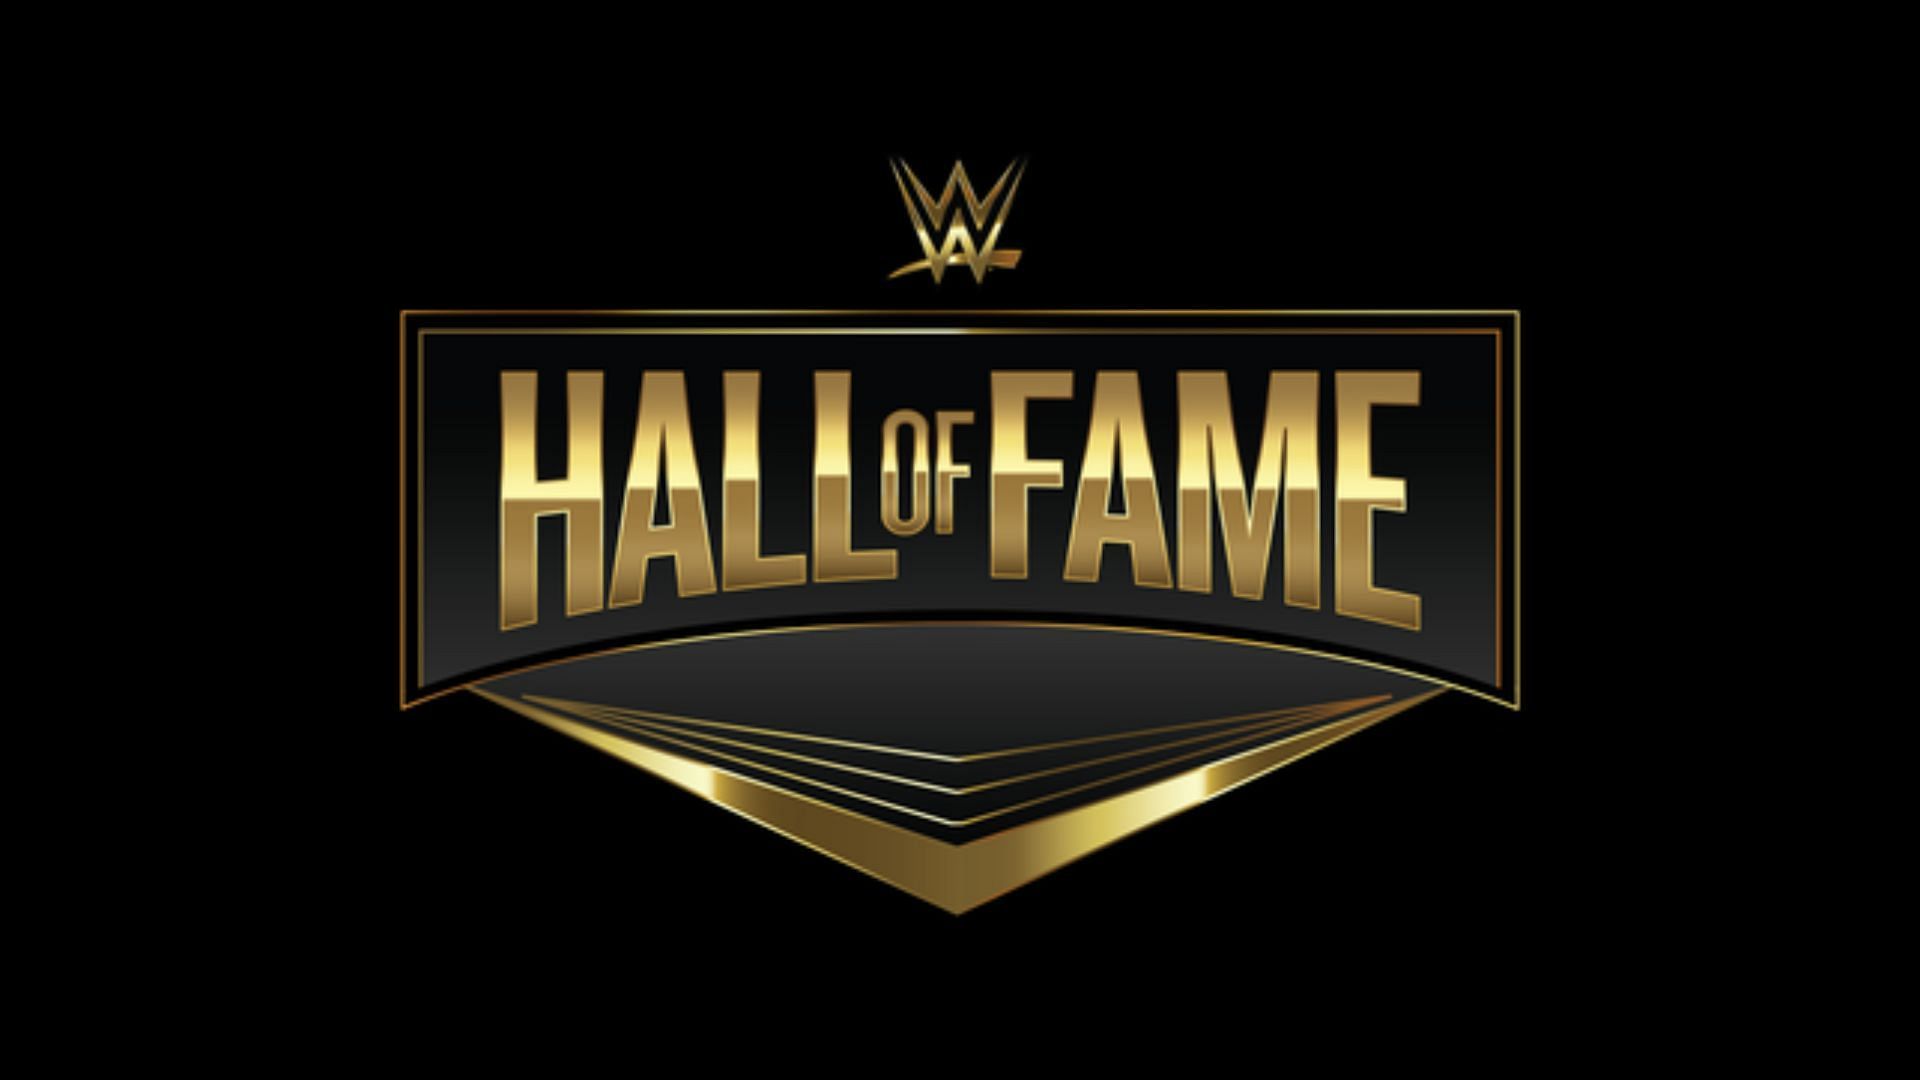 The WWE Hall of Fame takes place every year